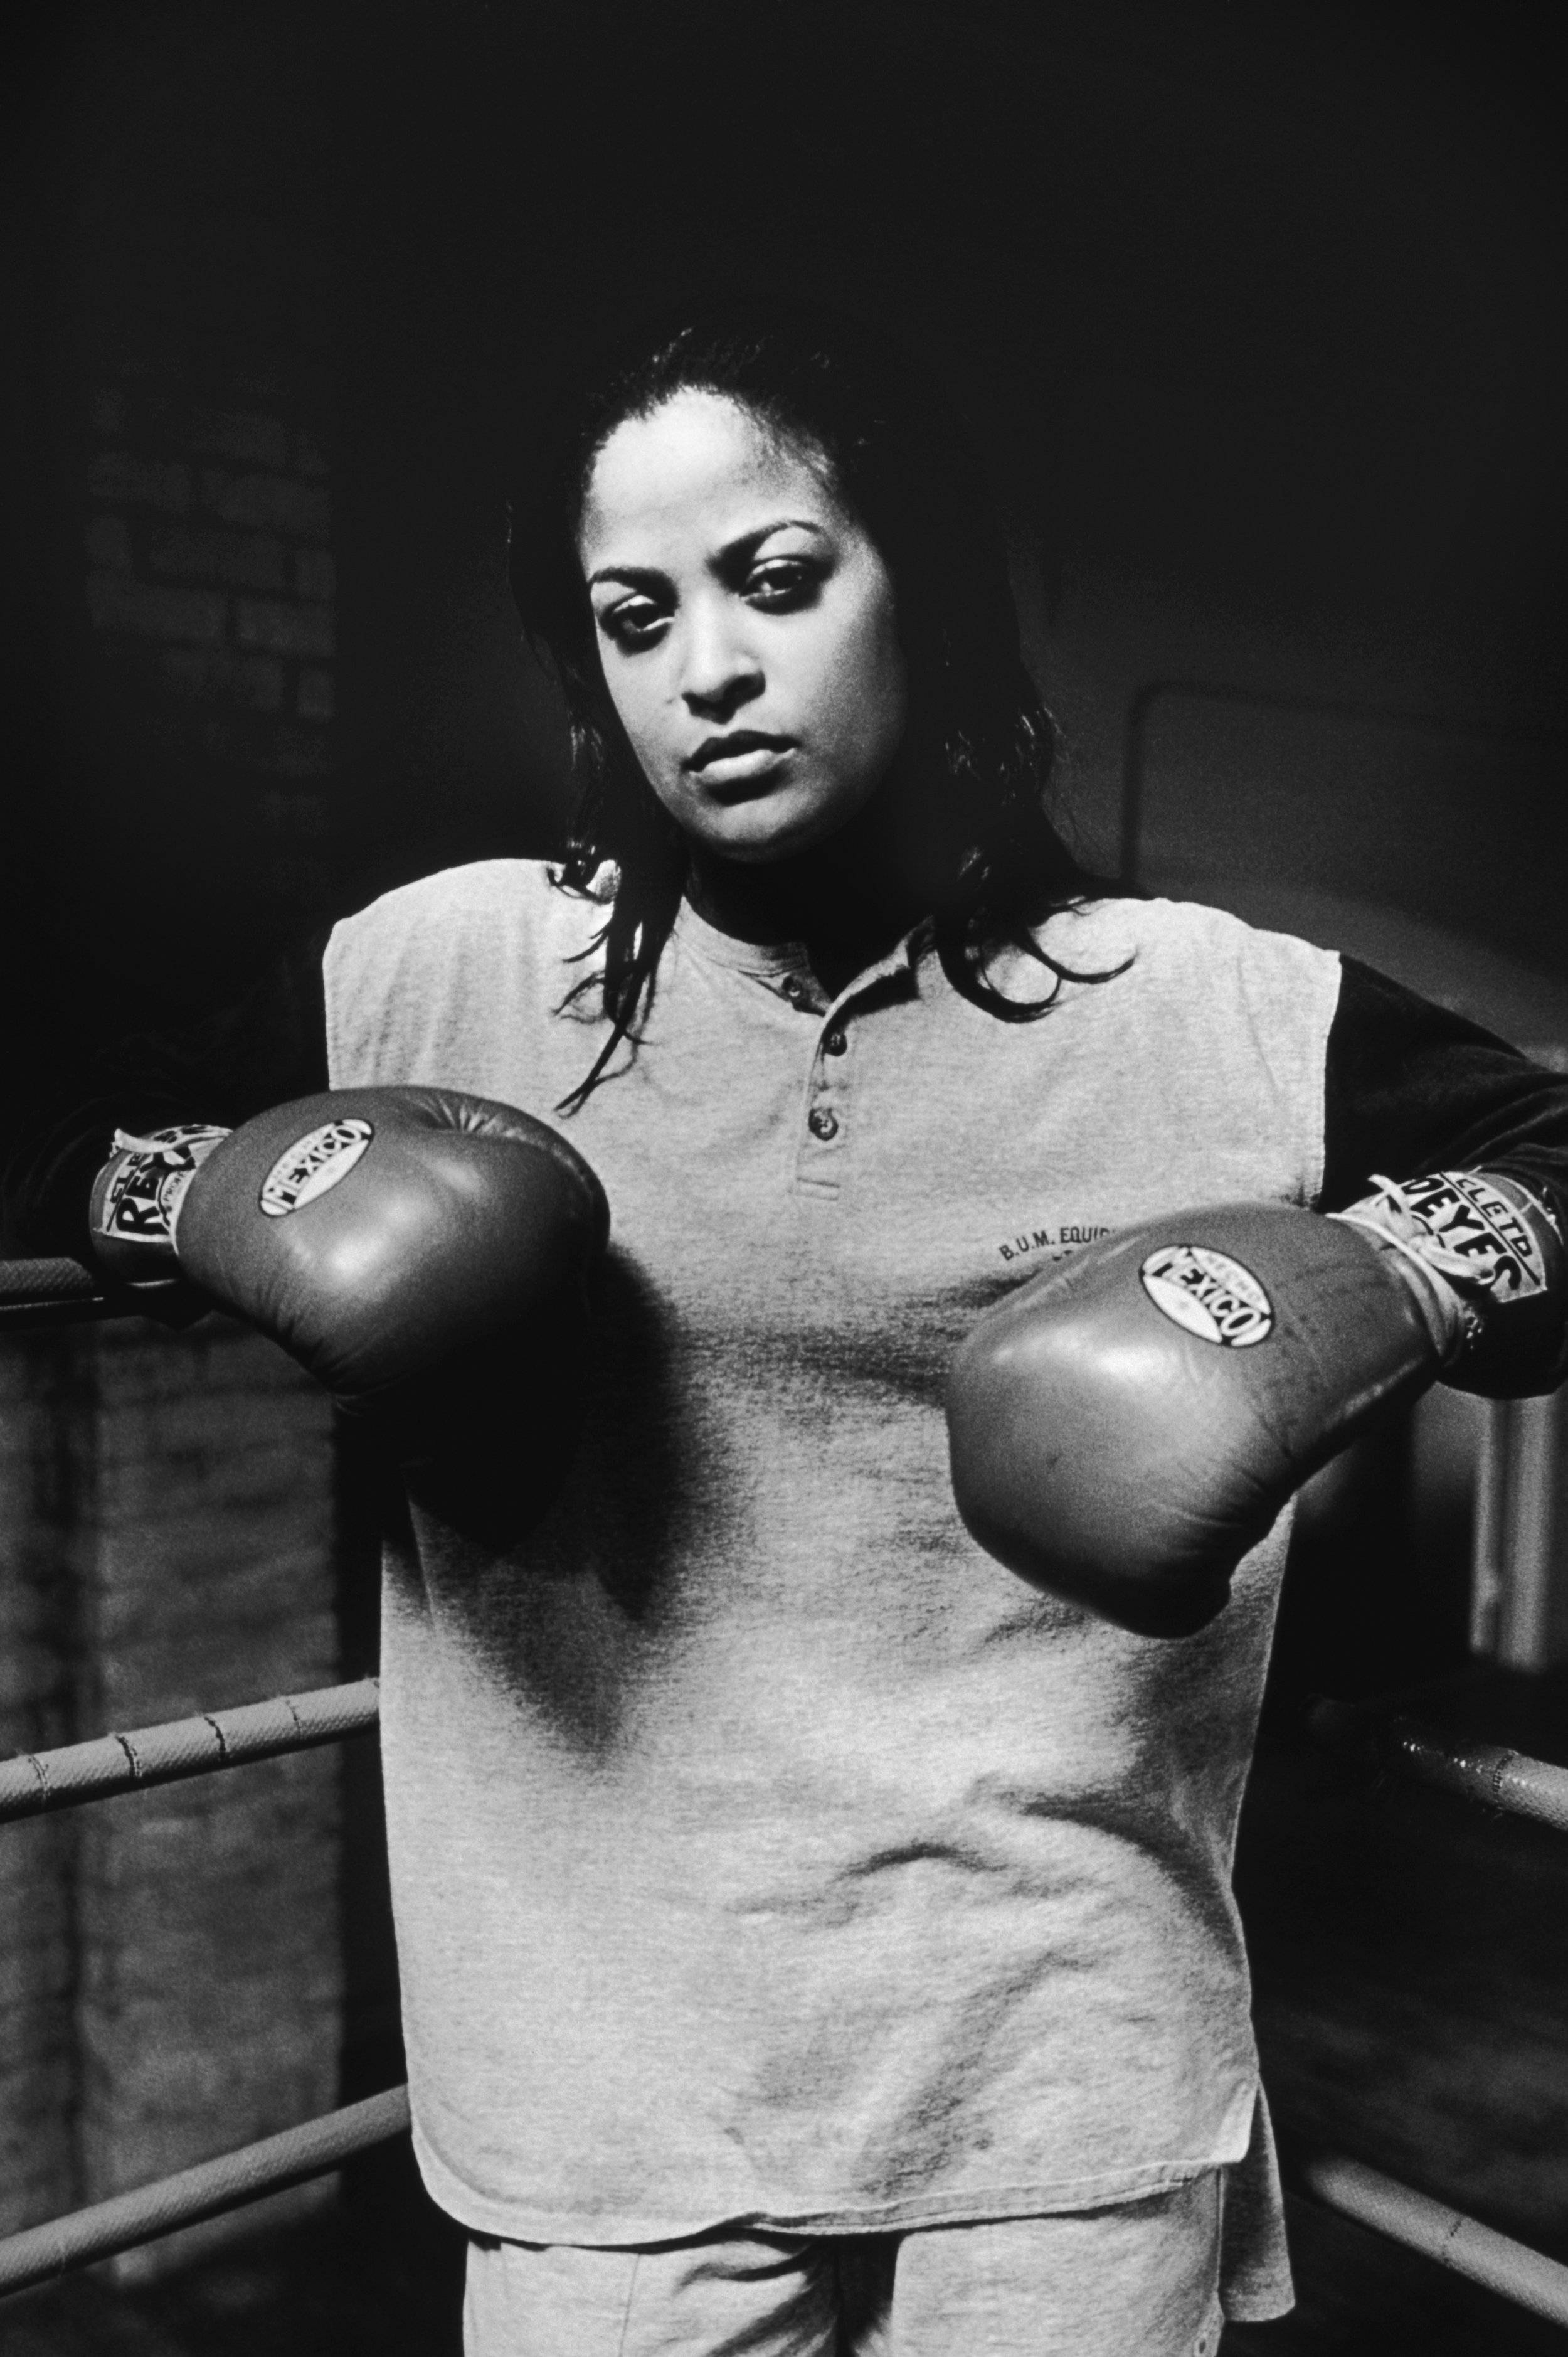  Laila Ali, daughter of legendary professional boxer, Muhammad Ali, trains at her gym in Los Angeles. 1999 